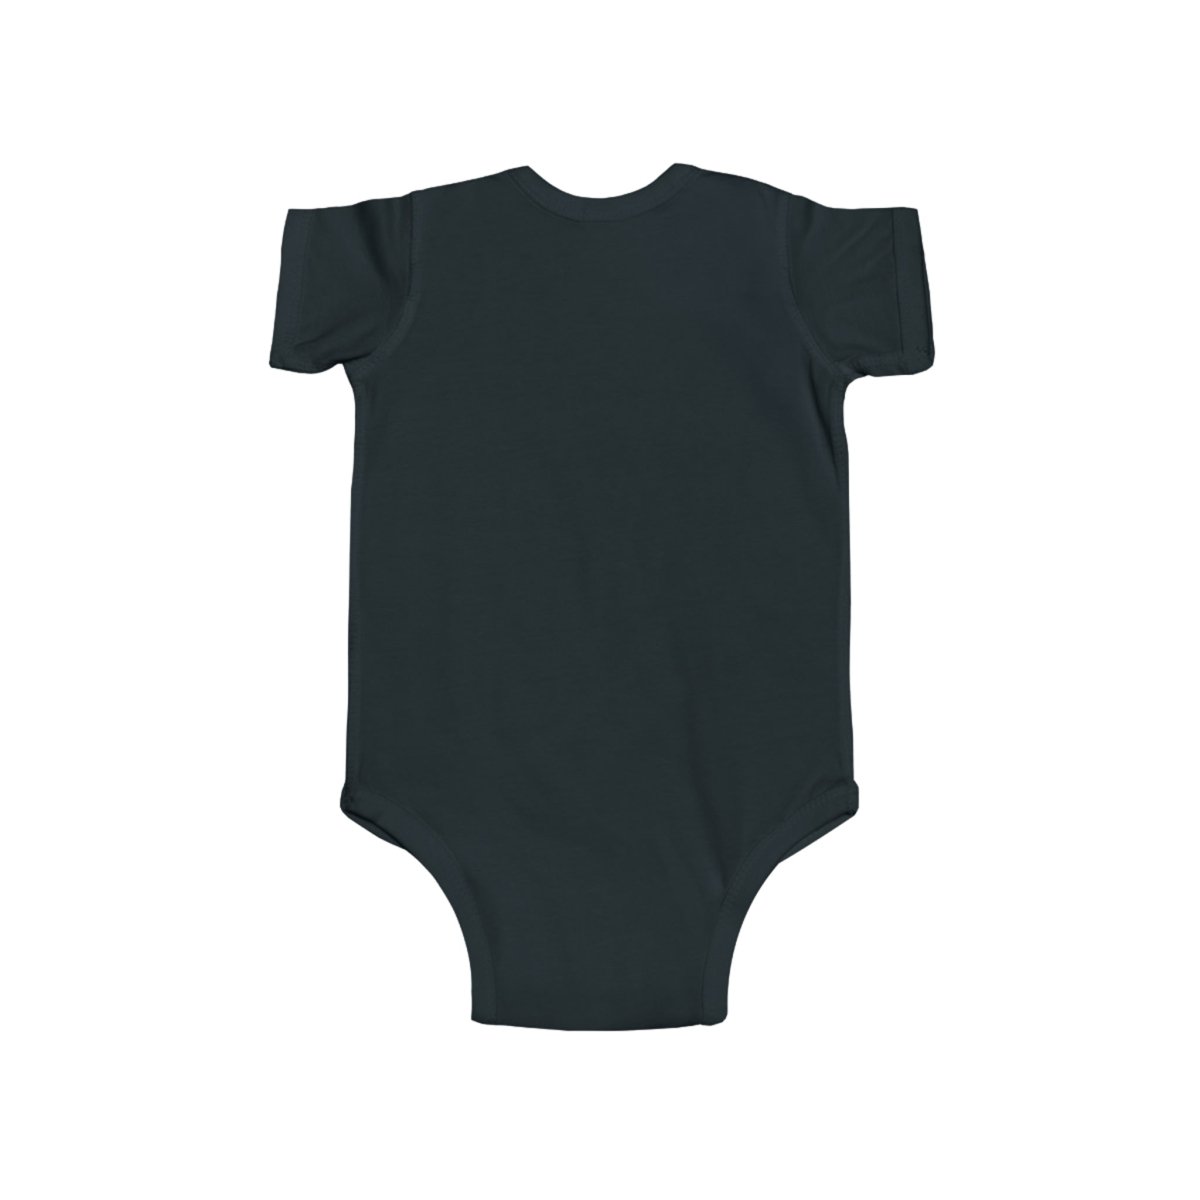 Don't Worry Onesie, Smiling Baby Gift